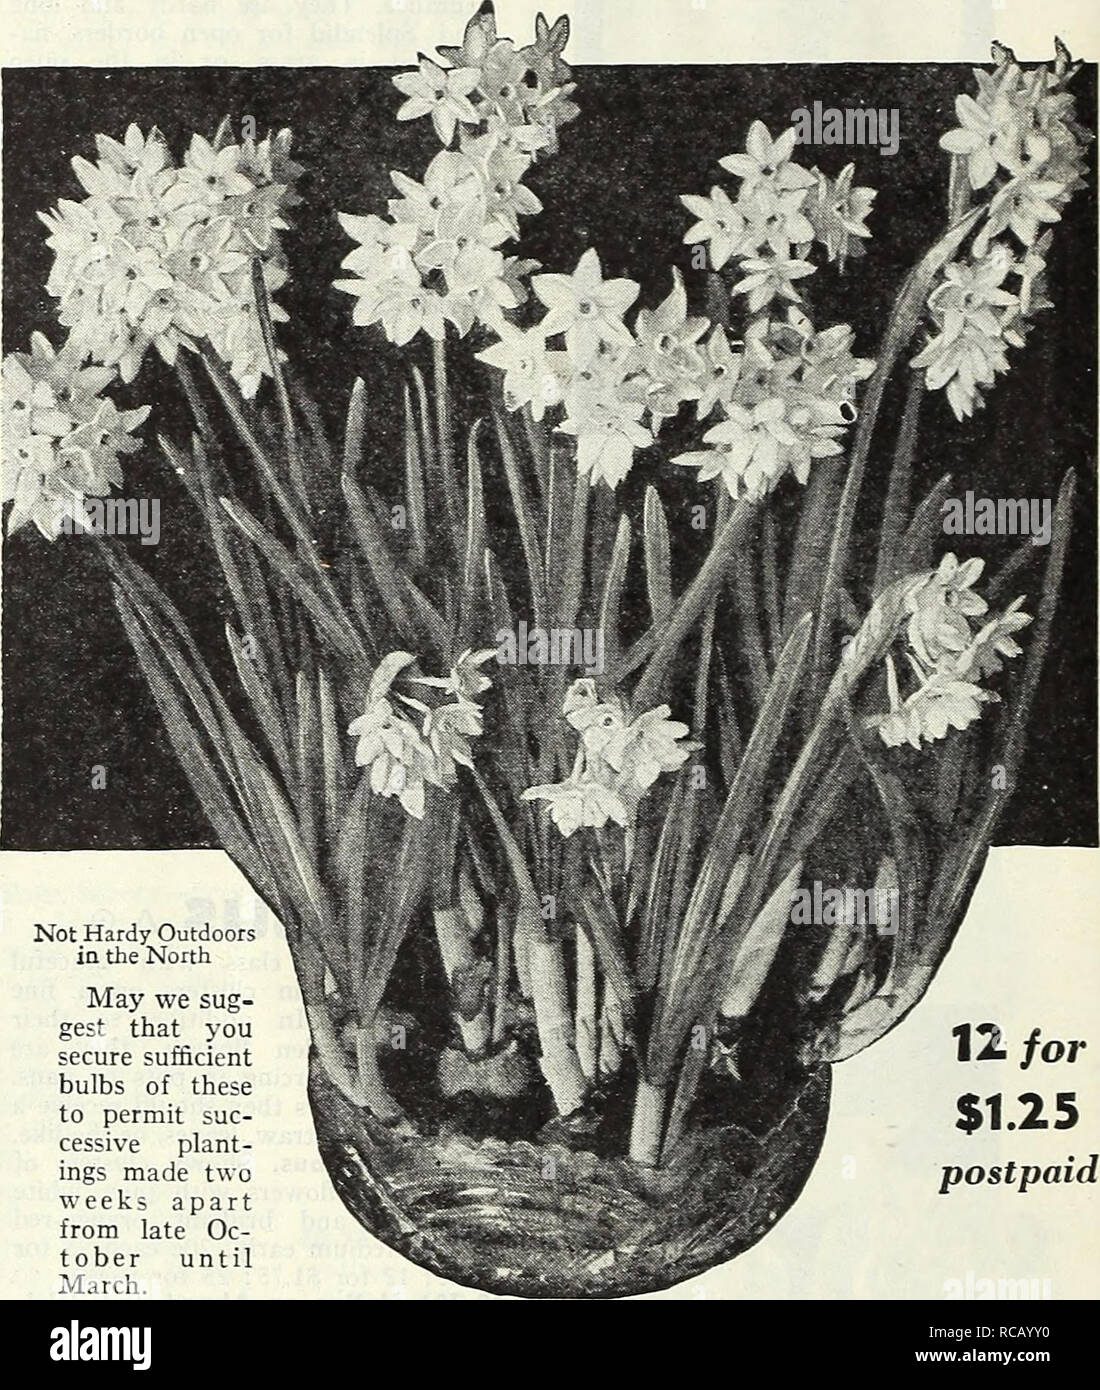 . Dreer's autumn 1946 planting guide. Bulbs (Plants) Catalogs; Flowers Seeds Catalogs; Gardening Equipment and supplies Catalogs; Nurseries (Horticulture) Catalogs; Vegetables Seeds Catalogs. Triandrus albus 40-806 Triandrus a'bus (Angels Tear). A perfect little gem with graceful nodding blooms in which the creamv white perianth petals are facing upward and the pure white cup is fully exposed to view. It re- sembles a miniature C'clamen. Give it a gritty soil as it likes good drainage. 6 in. 20c each; 3 for 4Sc; 12 for $1.60; 25 for $2.75; 100 for $10.00. 40-80Z W. P. Milner. A m.ore vigor- o Stock Photo